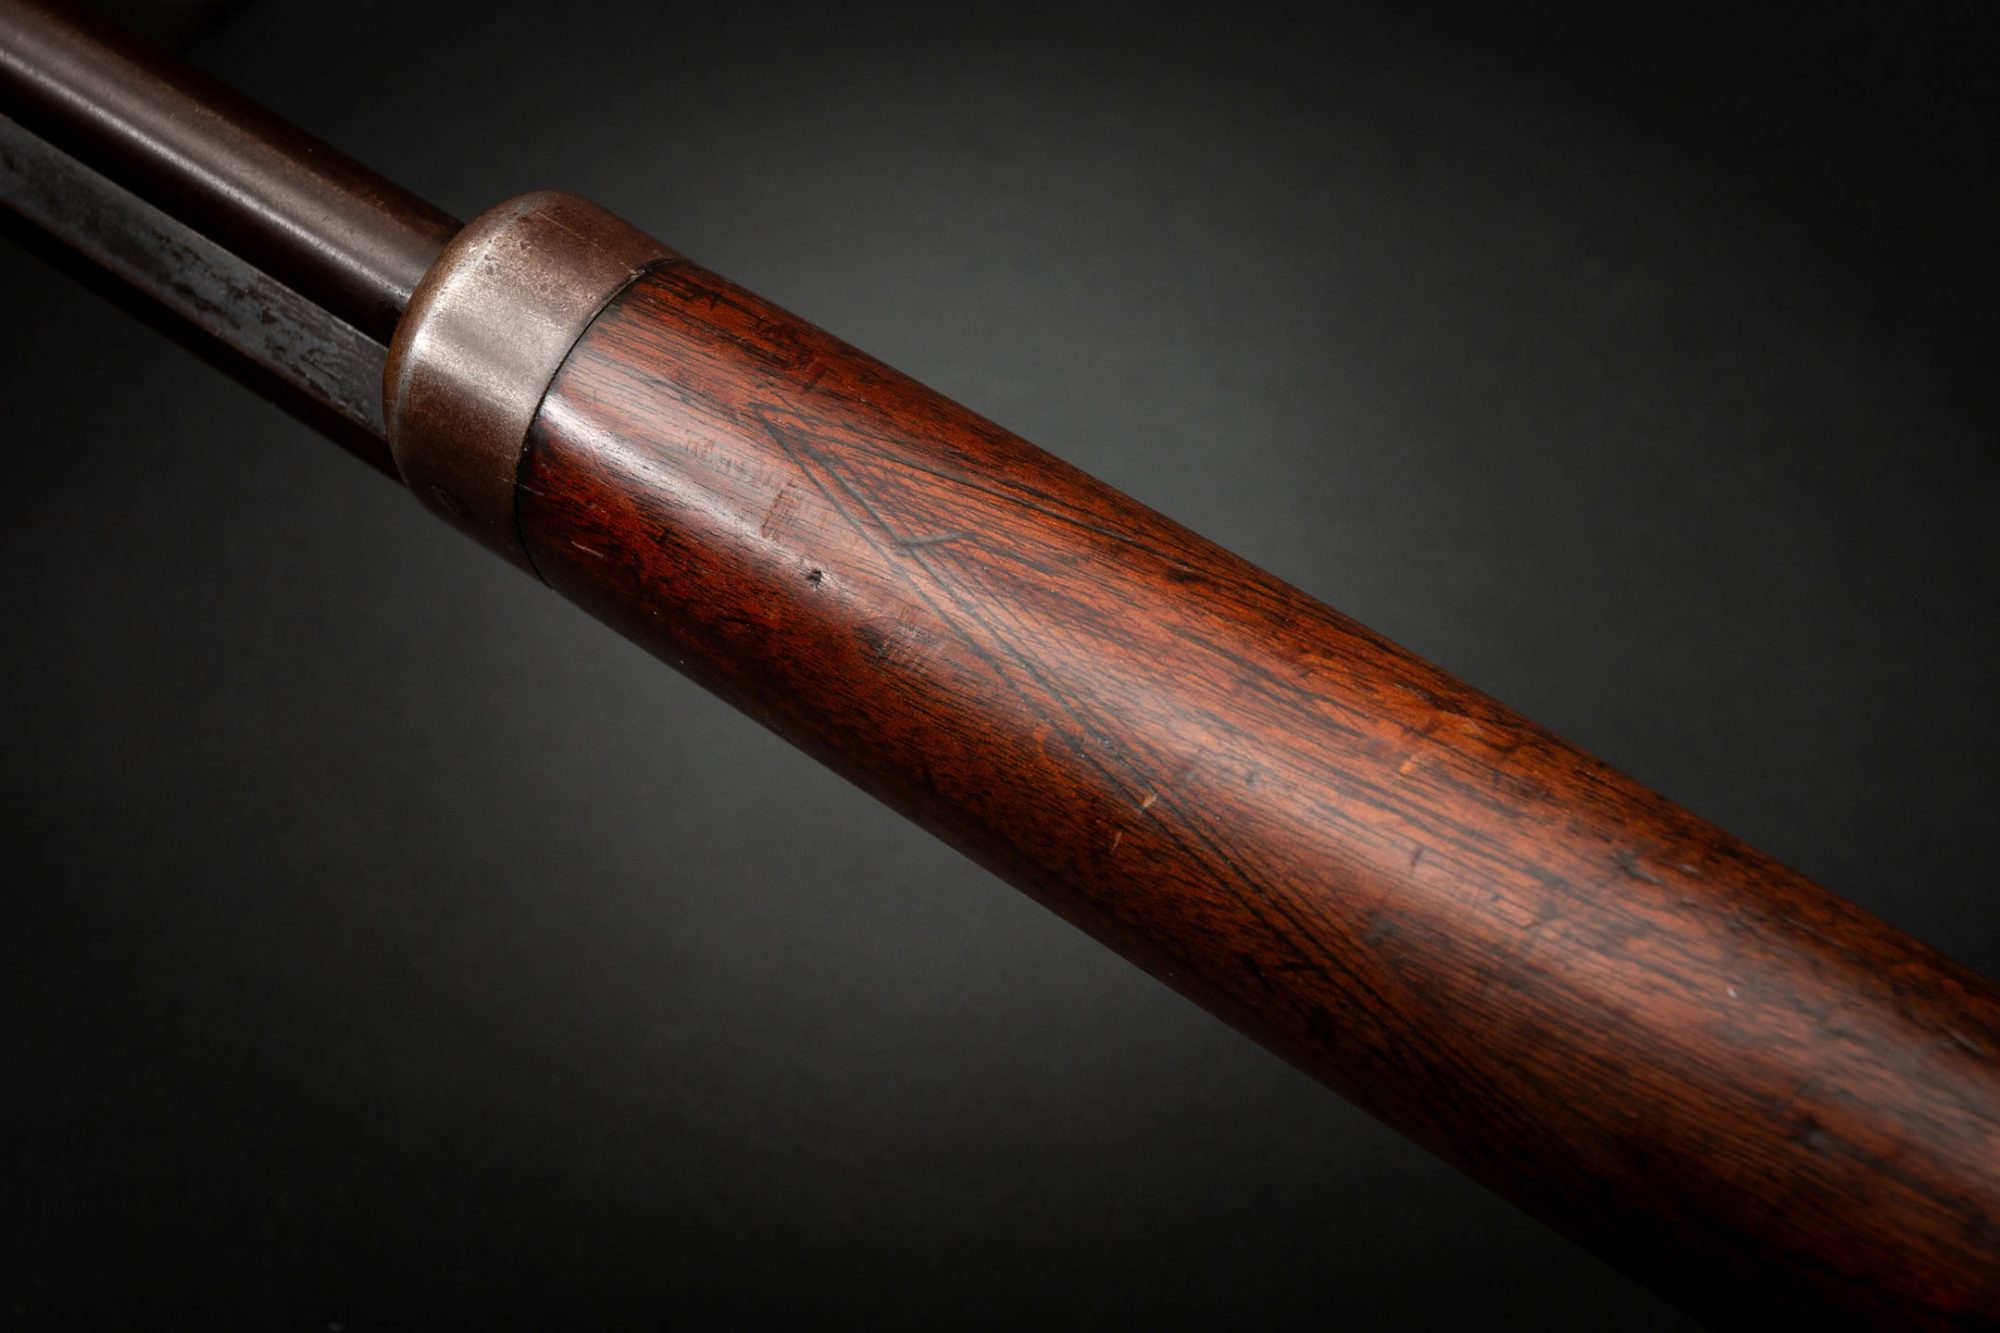 Marlin Model 94 in .32-20 Winchester, for sale by Turnbull Restoration Co. of Bloomfield, NY